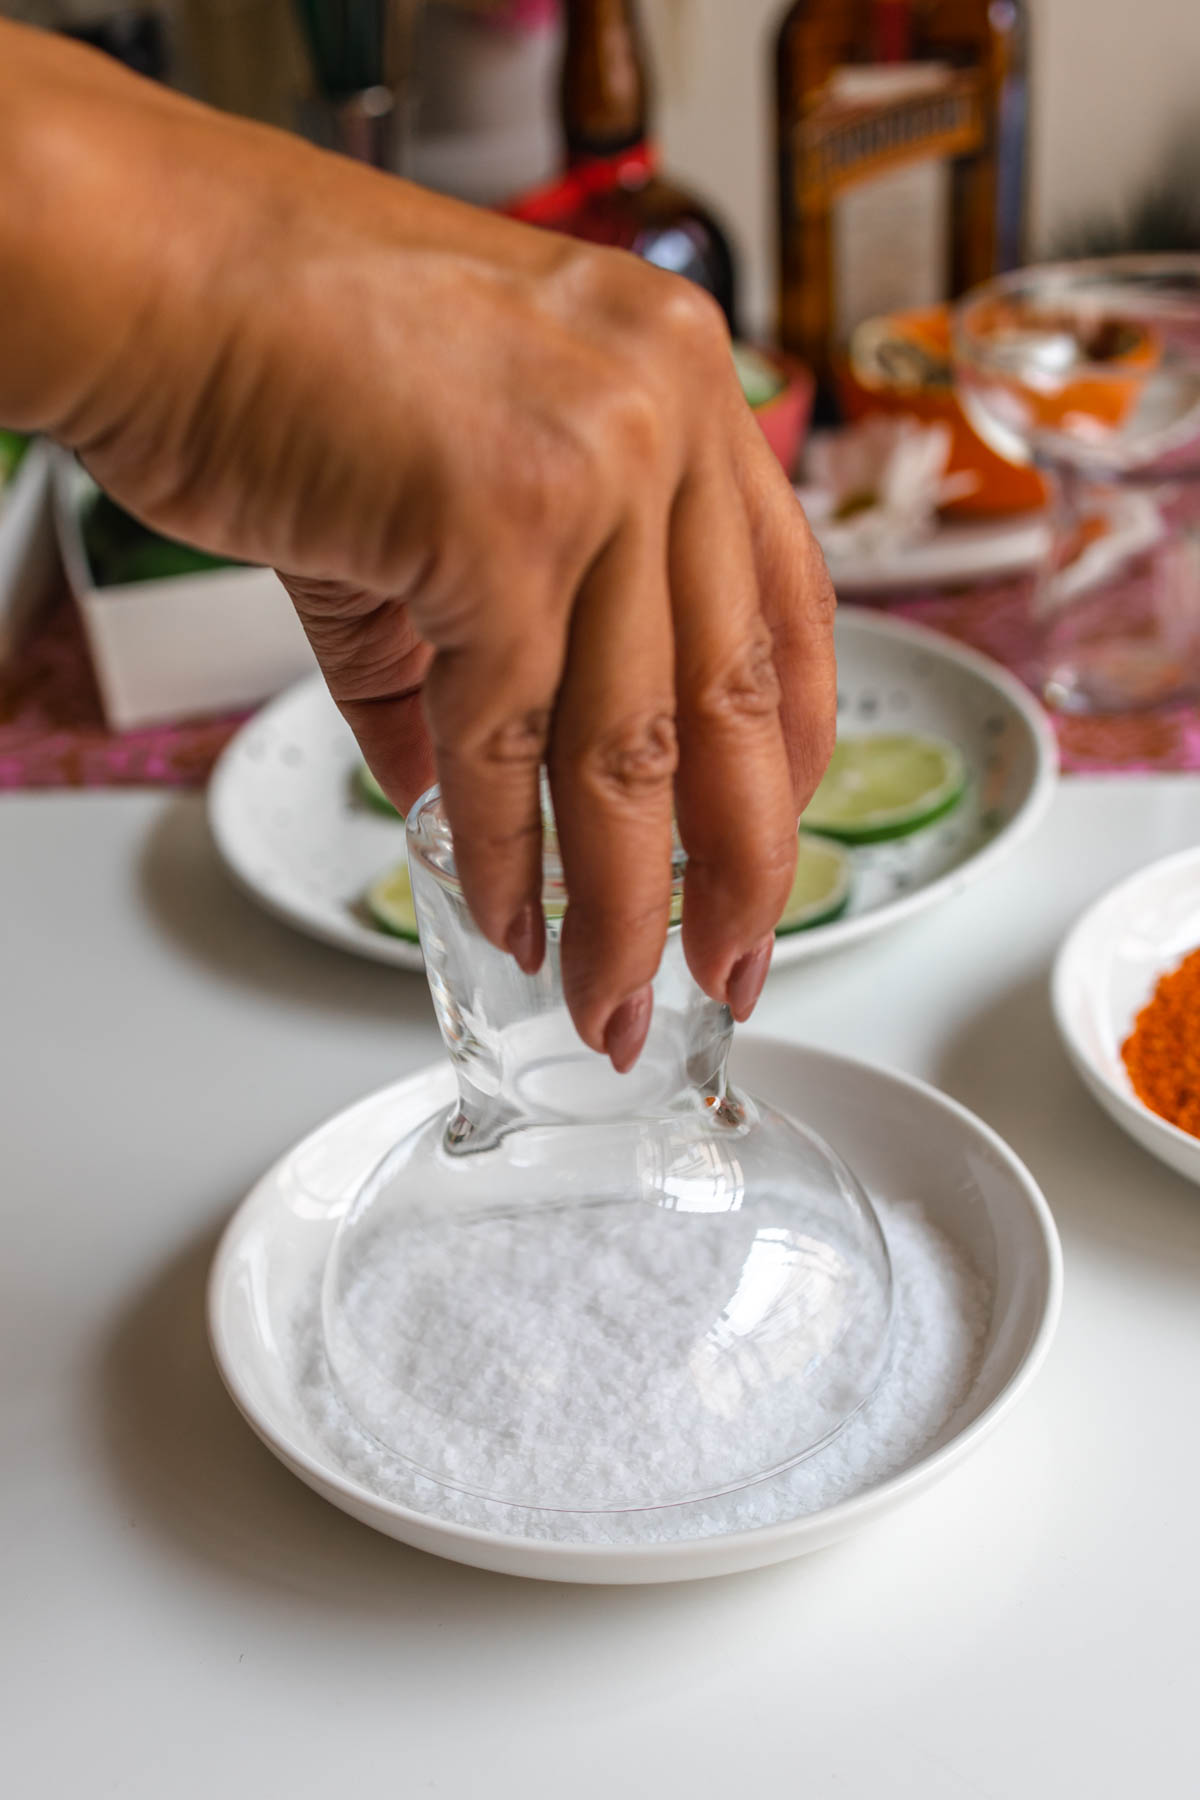 A person dipping a margarita glass into a plate with salt.